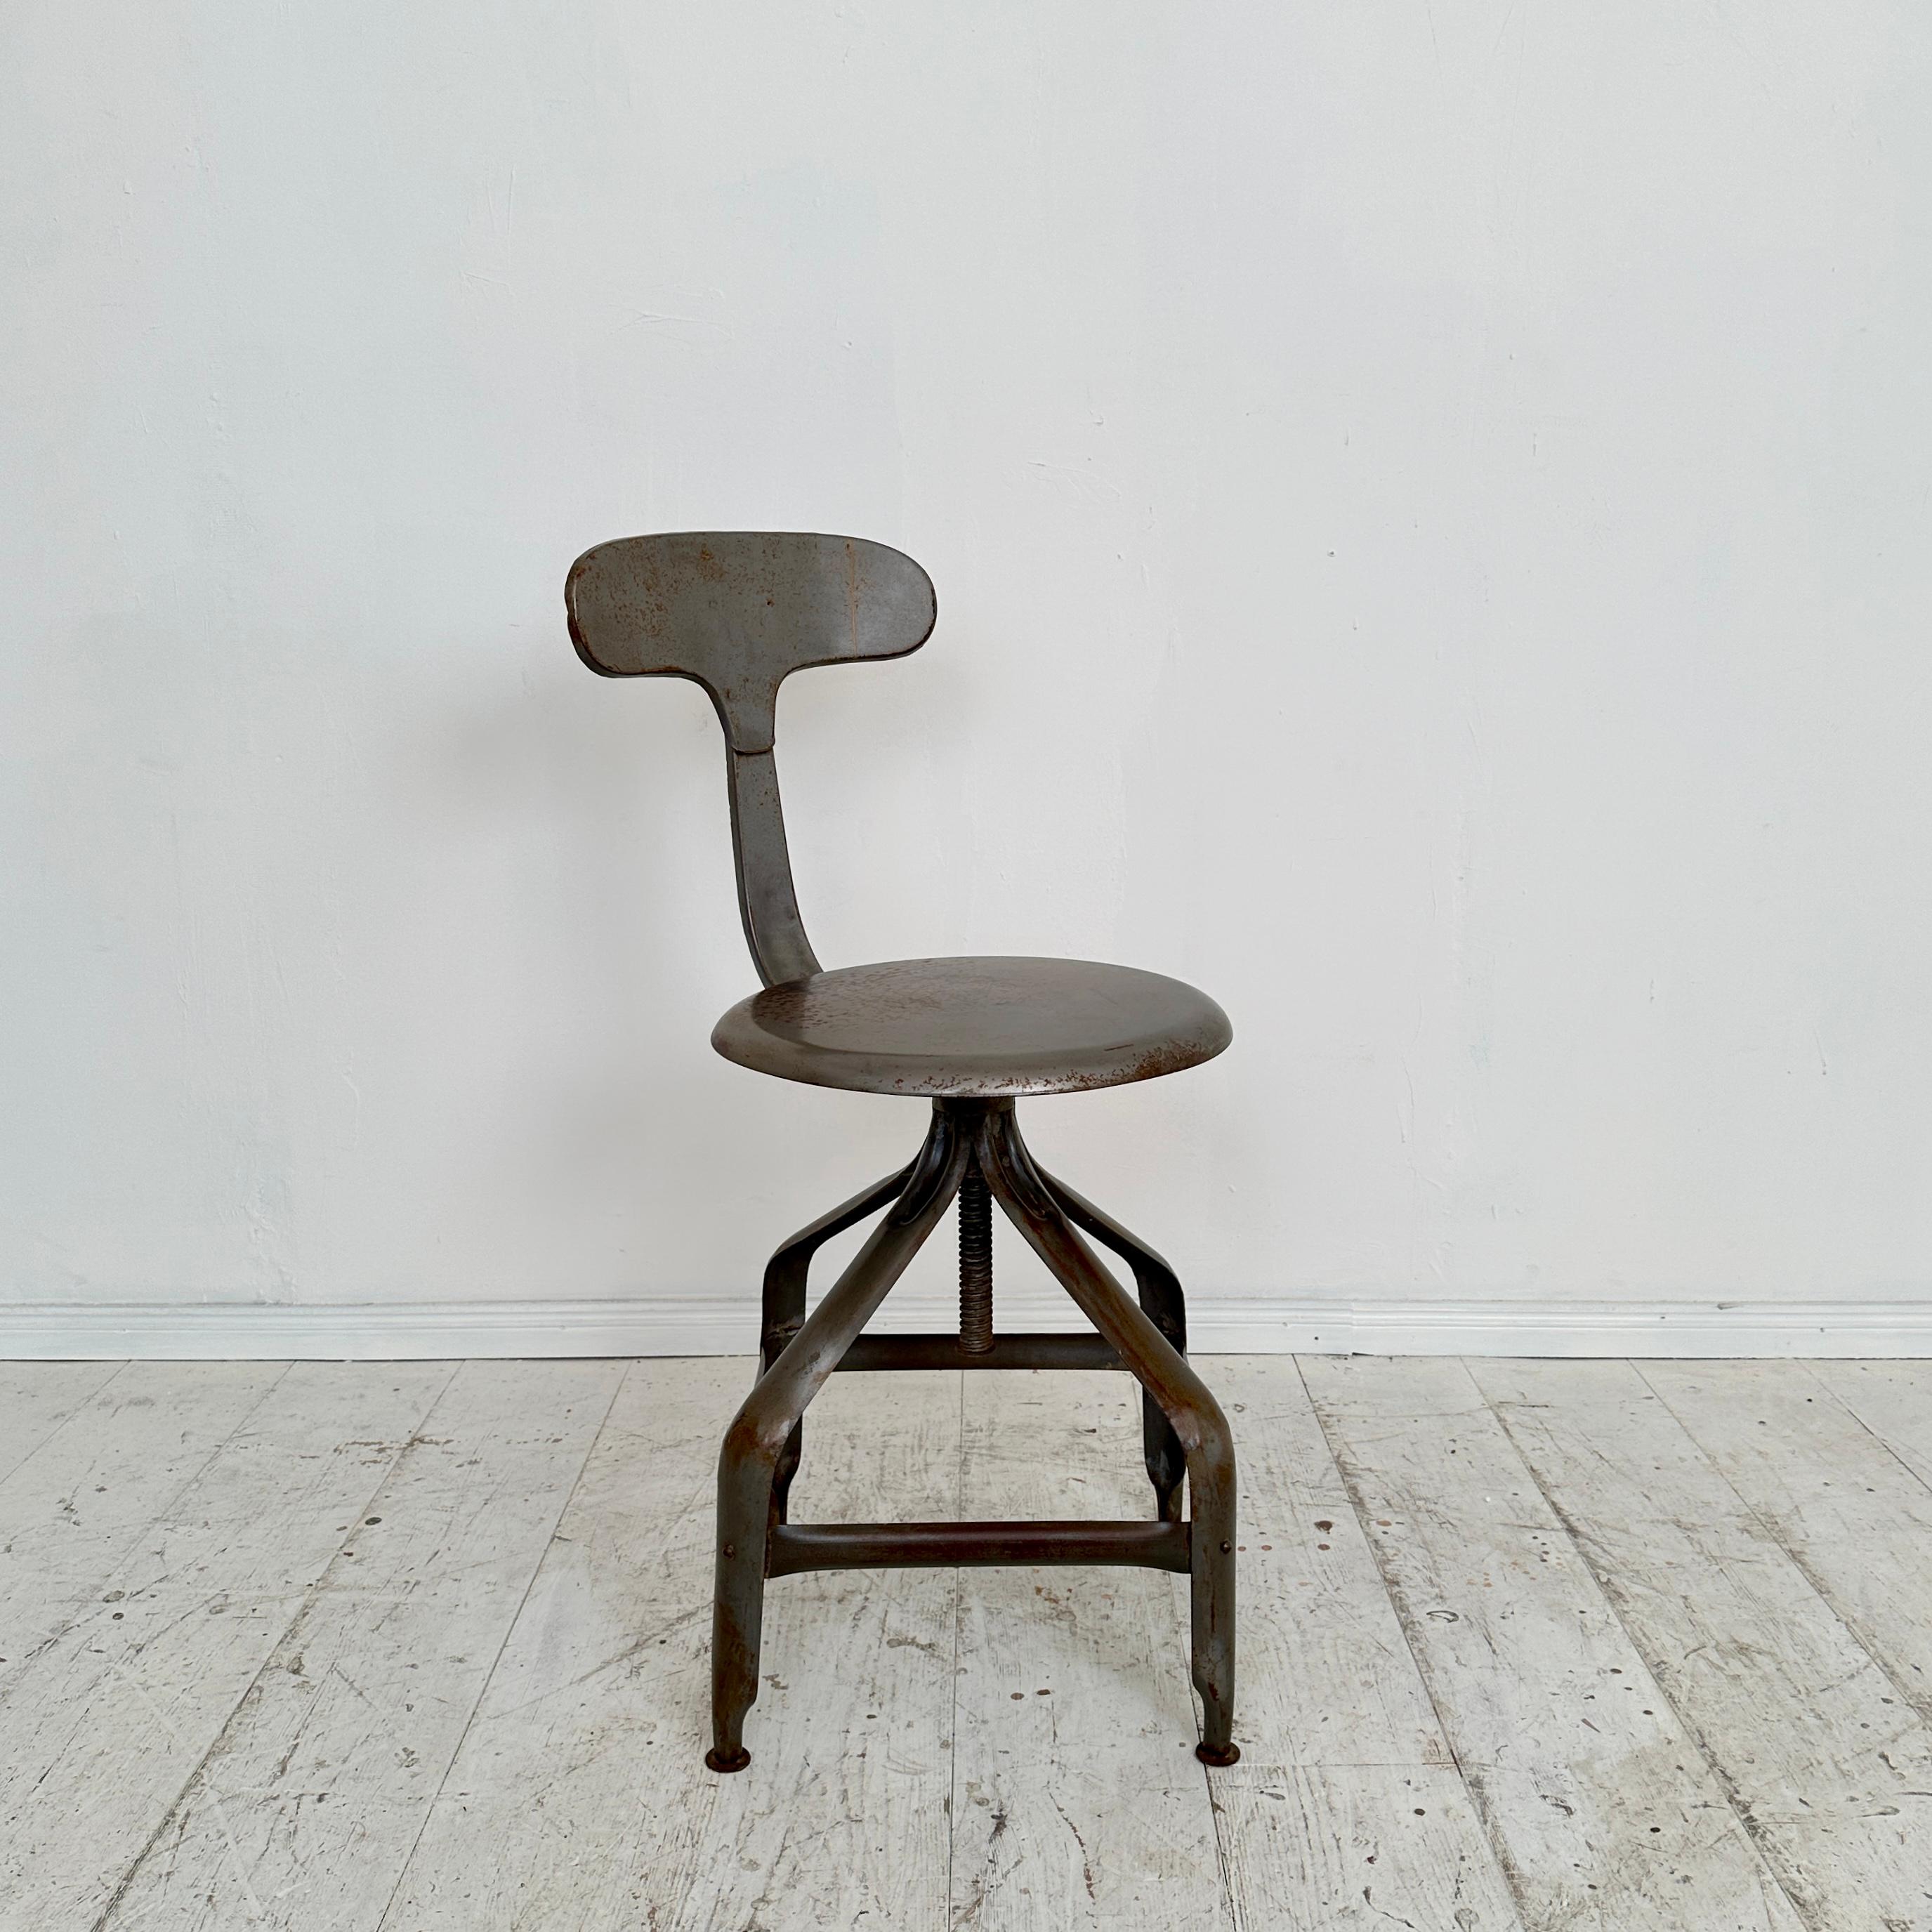 Step back in time to the rugged charm of the 1950s with this exceptional industrial swivel chair, a true one-of-a-kind piece. Crafted entirely from metal, it embodies the durability and utilitarian aesthetic of the era. The sturdy construction